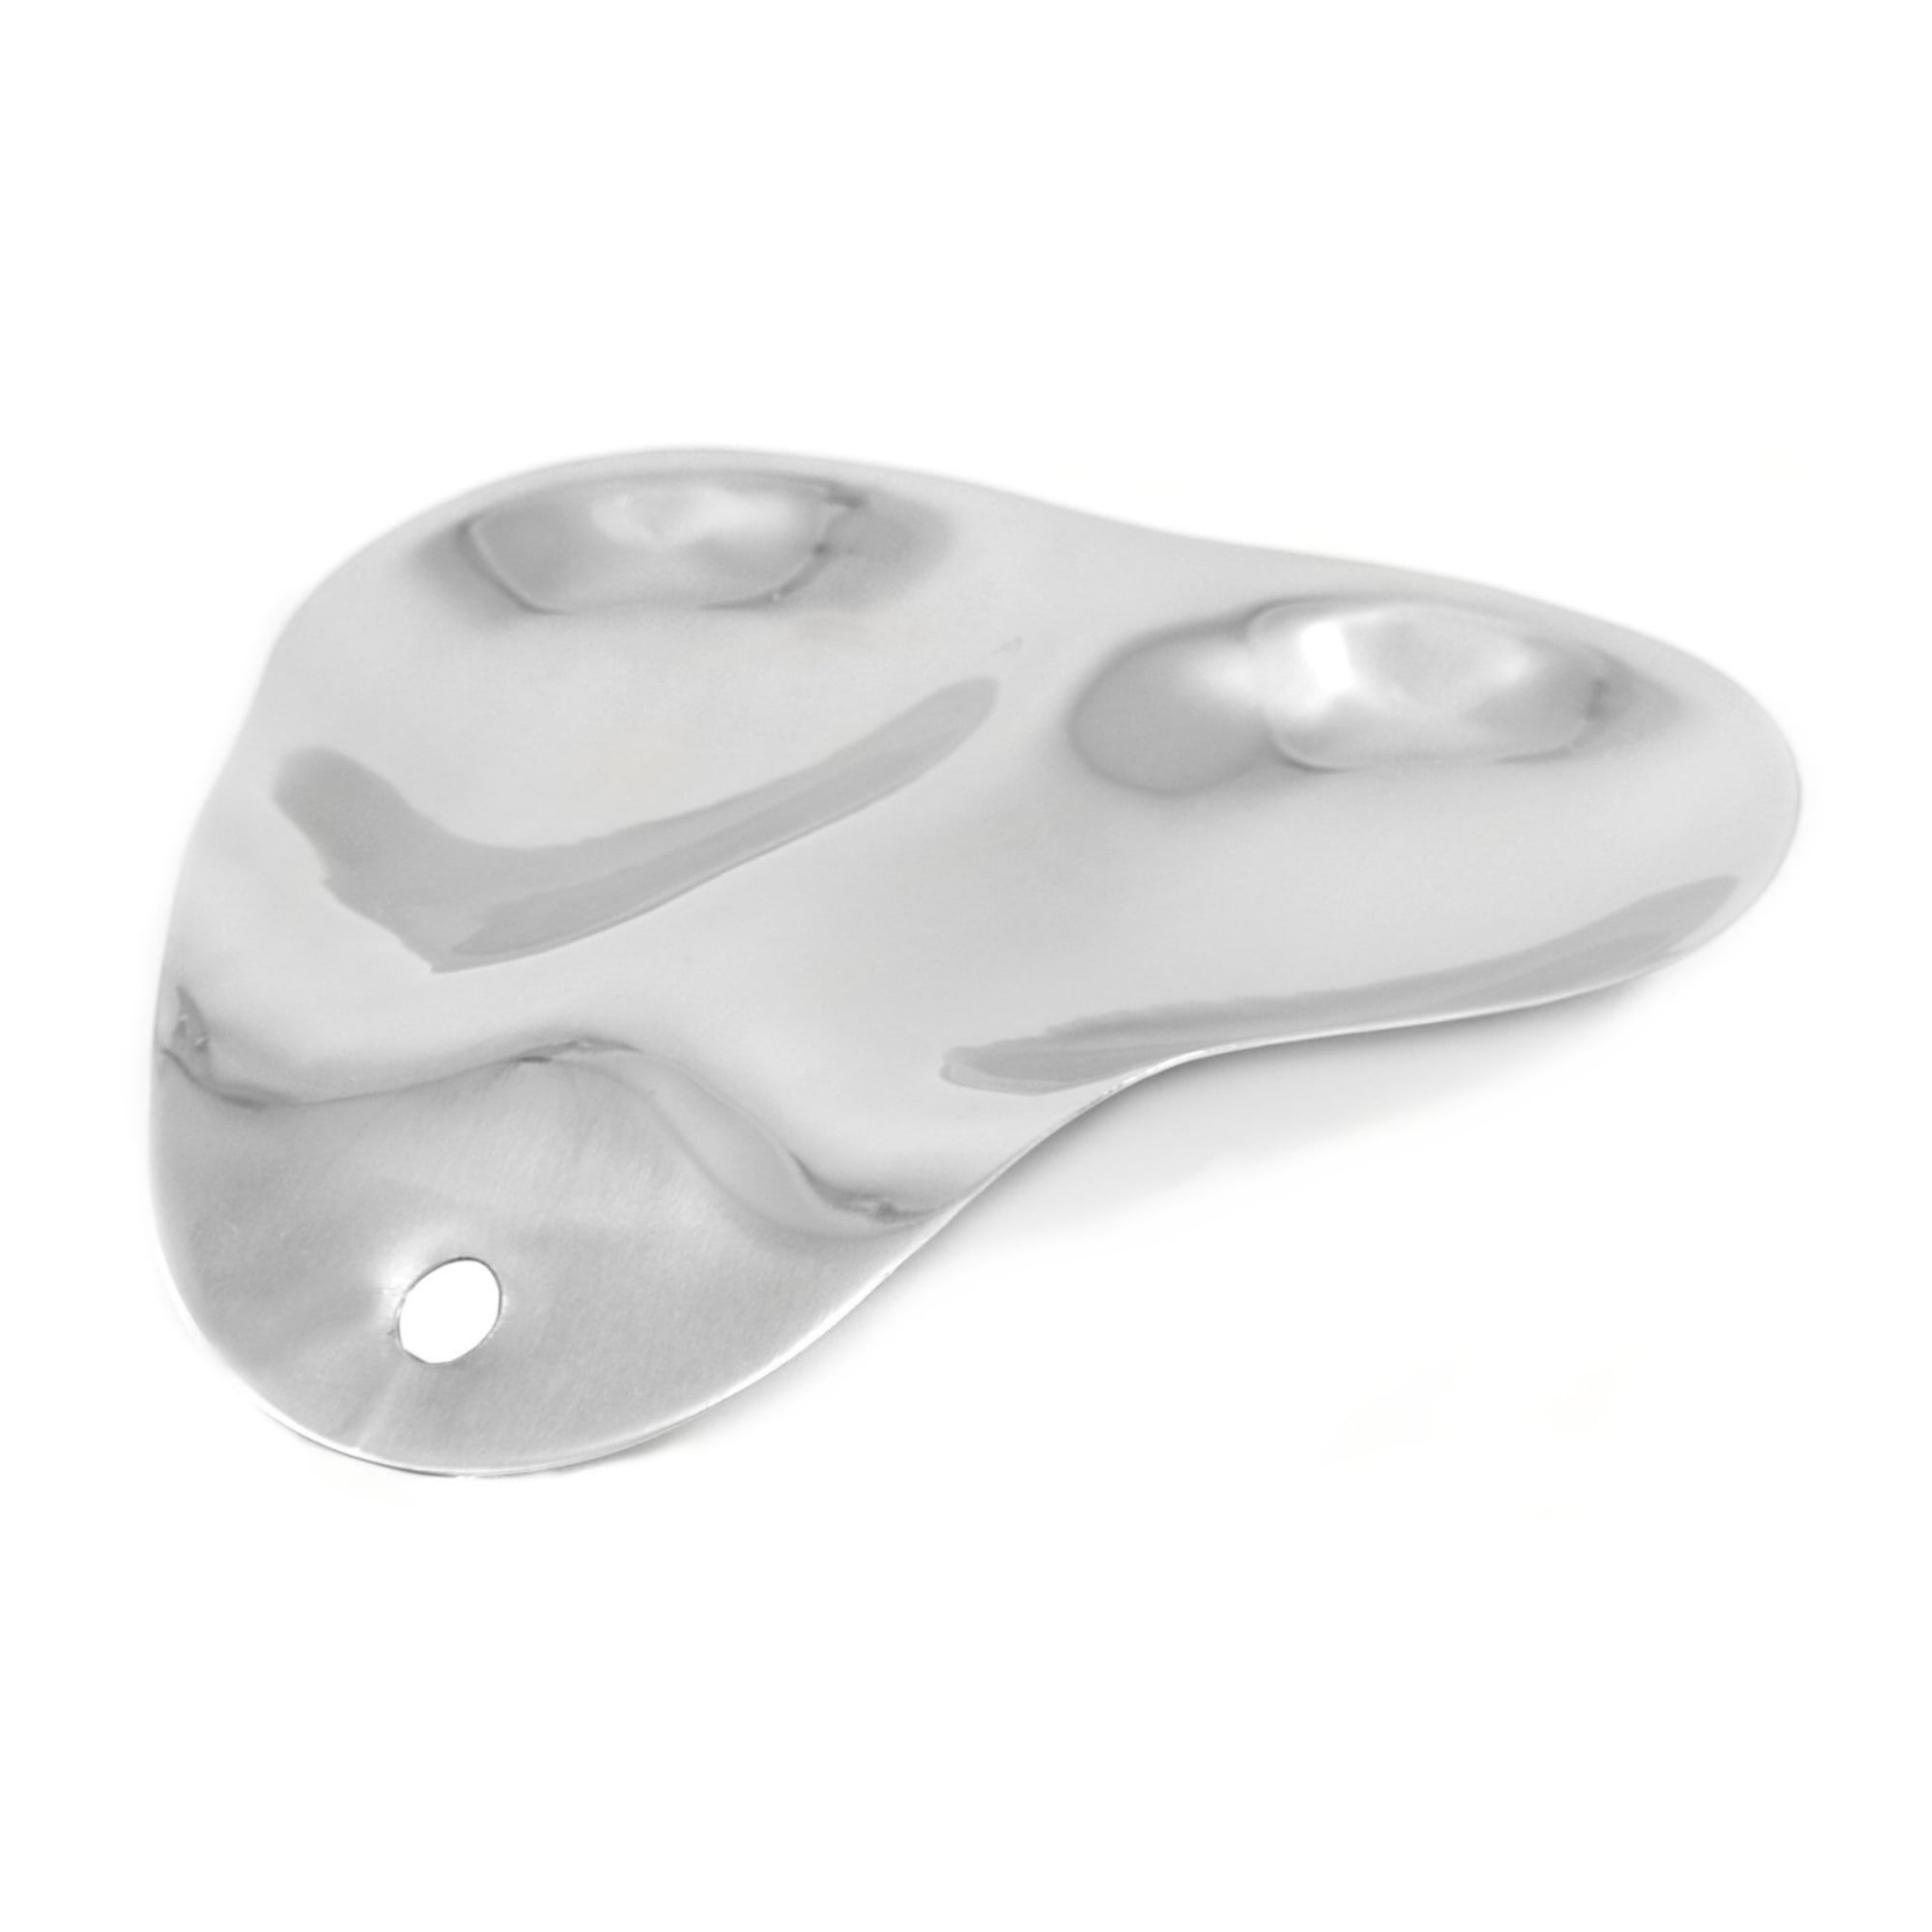 RSVP Endurance Mirror Finish 18/8 Stainless Steel Double Spoon Rest .